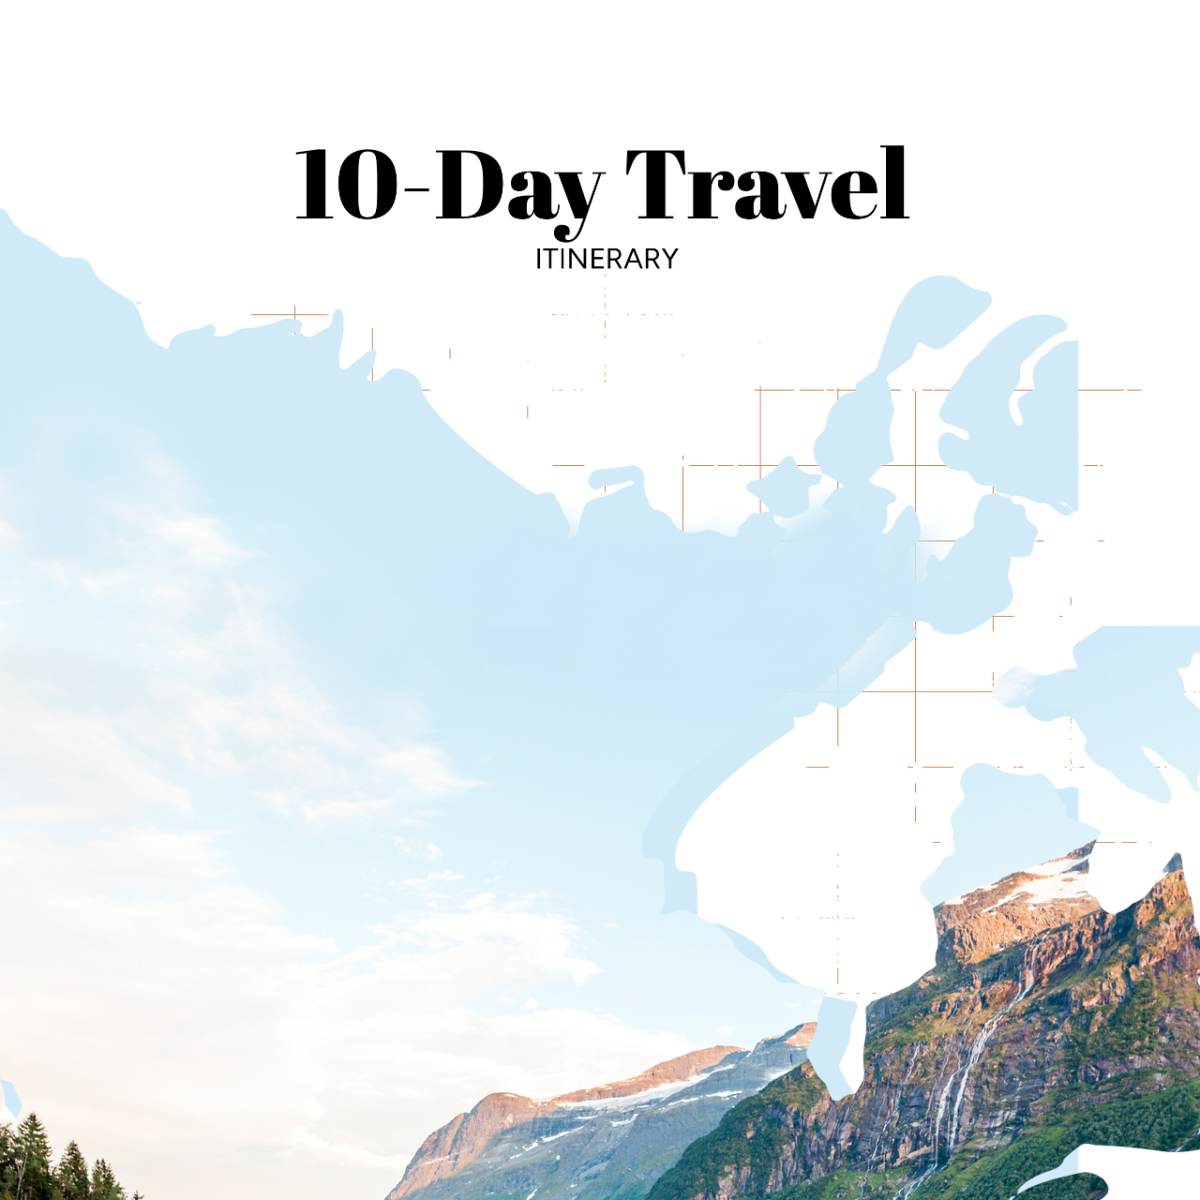 10 Day Travel Itinerary Template